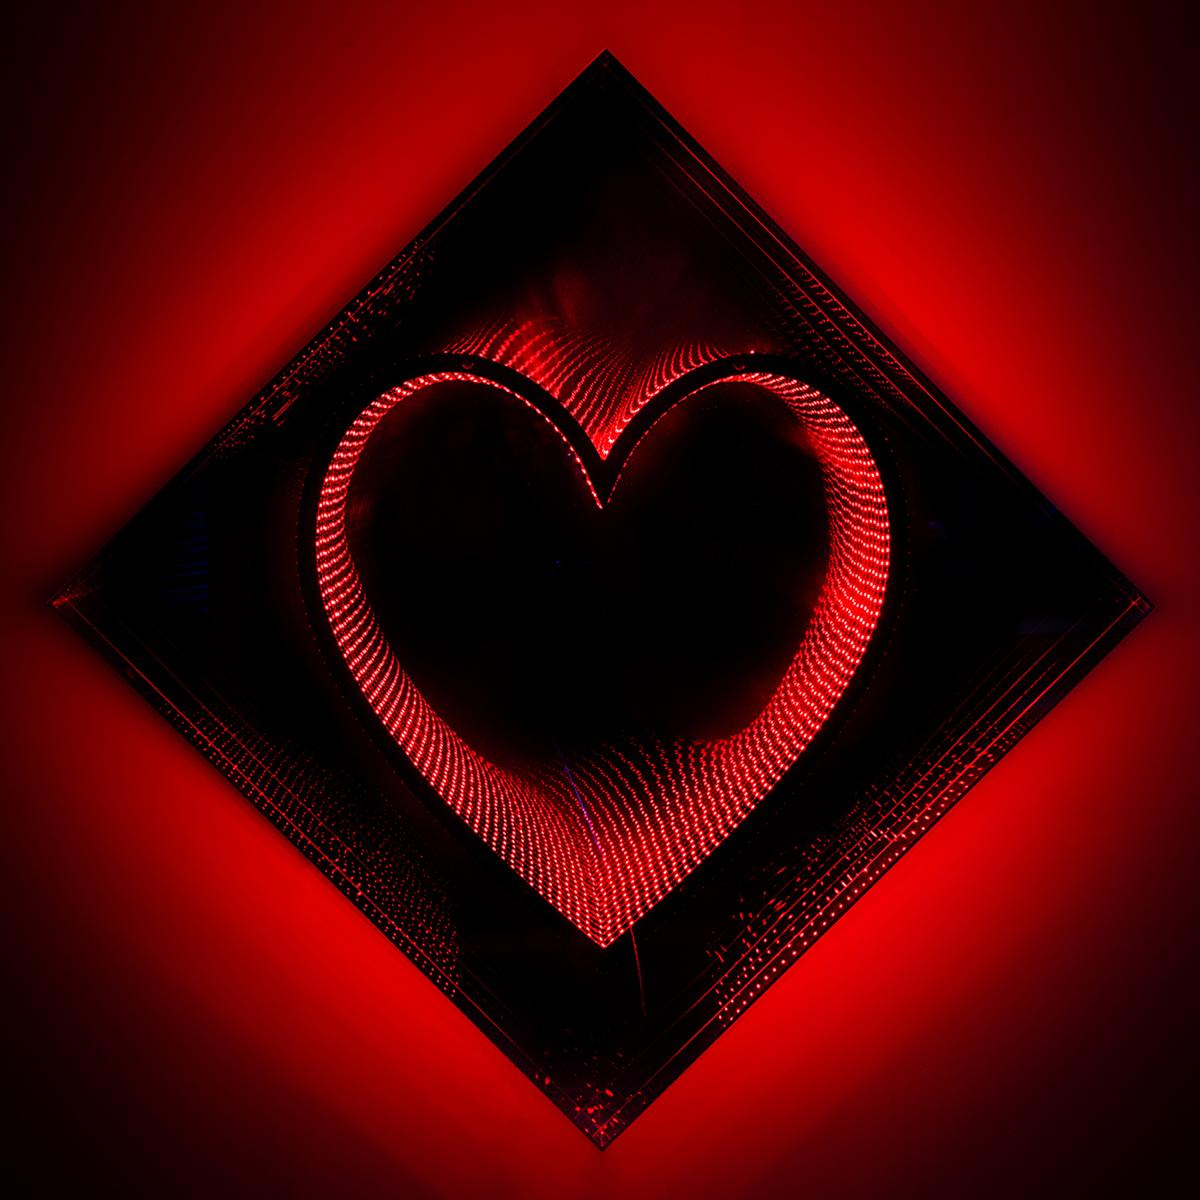 Hand-Crafted Heart Light Mirror Wall Decoration